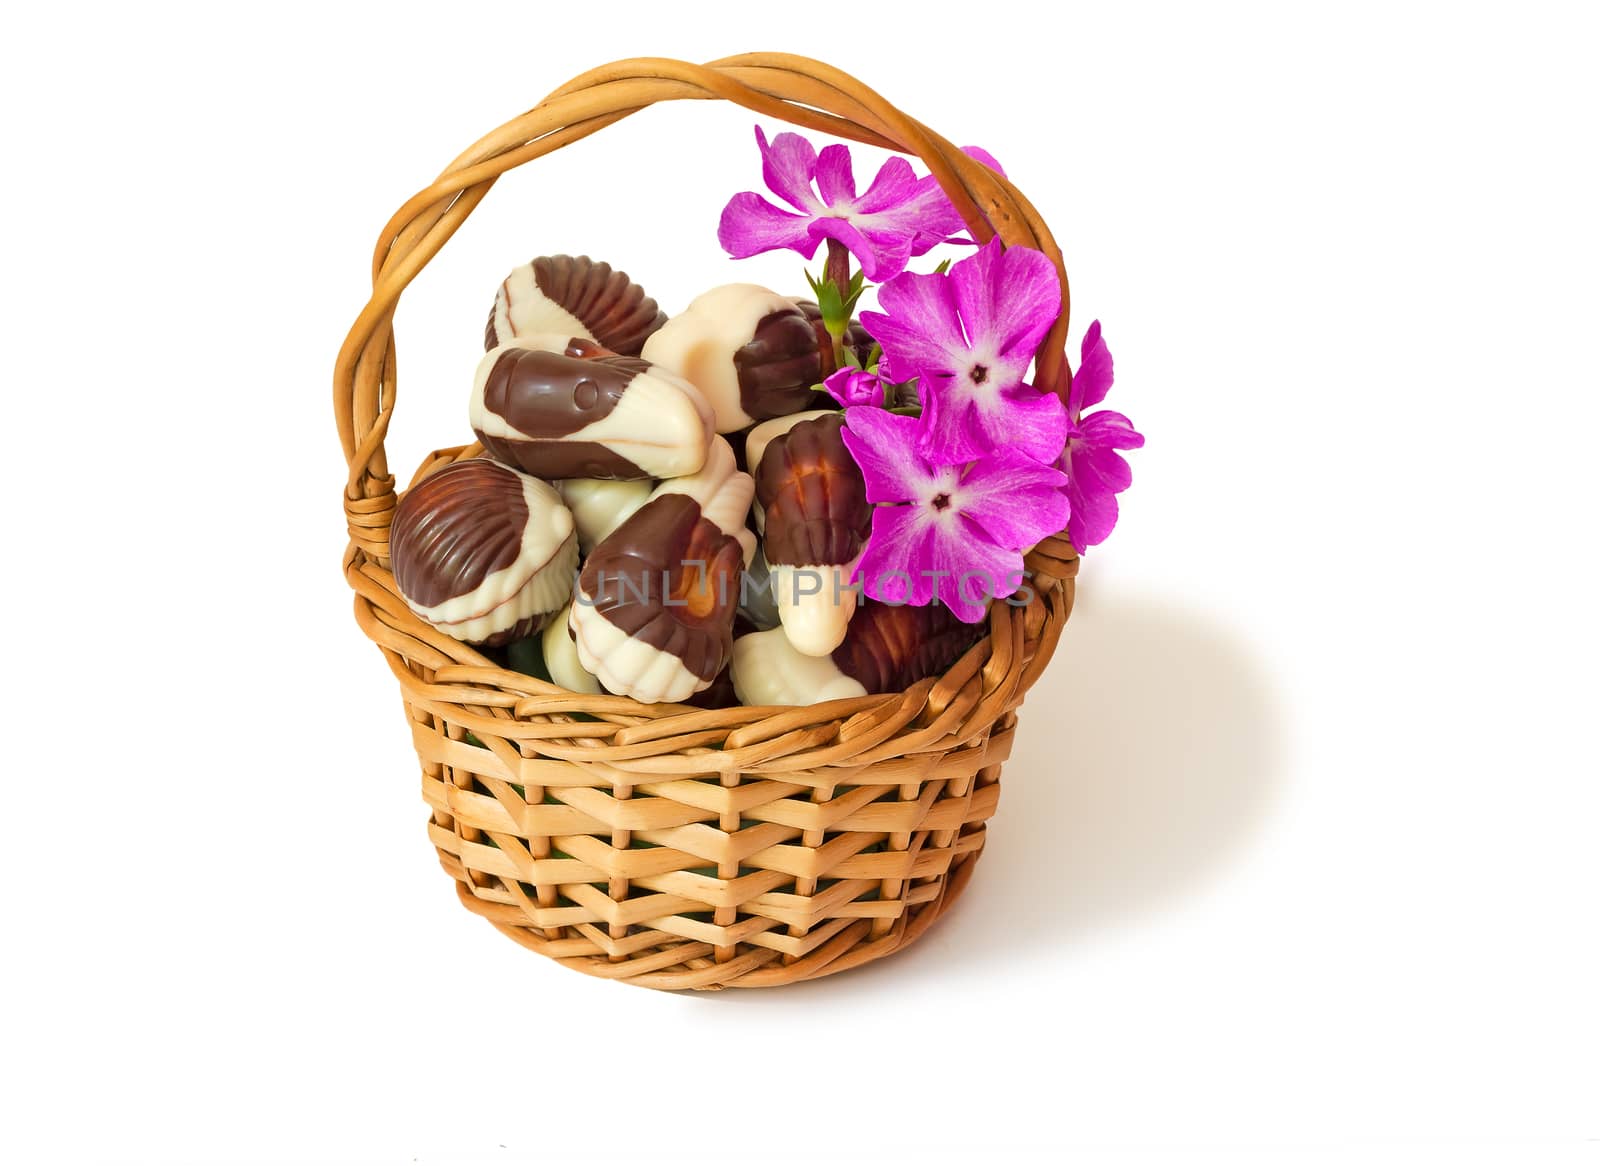 The wattled basket filled with tasty chocolates. It is presented on a white background